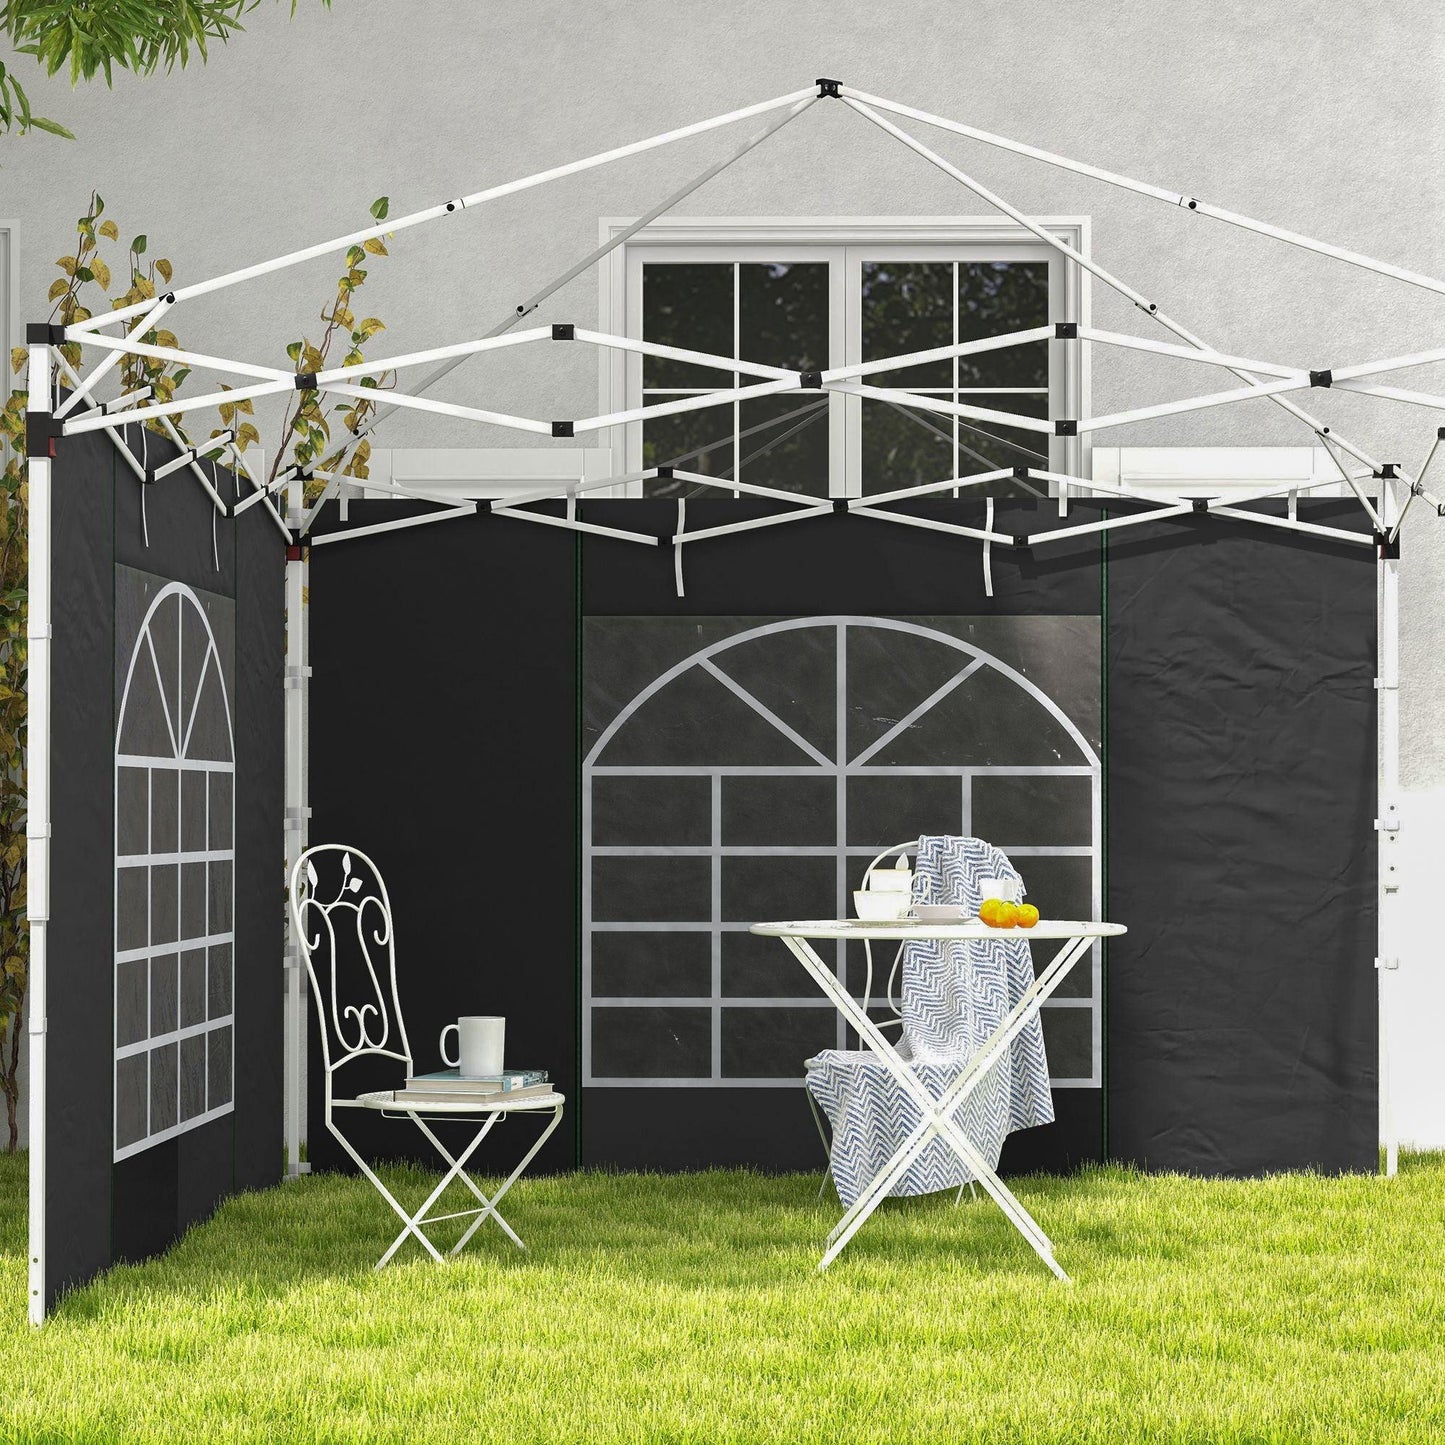 Outsunny Gazebo Side Panels, 2 Pack Sides Replacement, for 3x3(m) or 3x6m Pop Up Gazebo, with Windows and Doors, Black - ALL4U RETAILER LTD